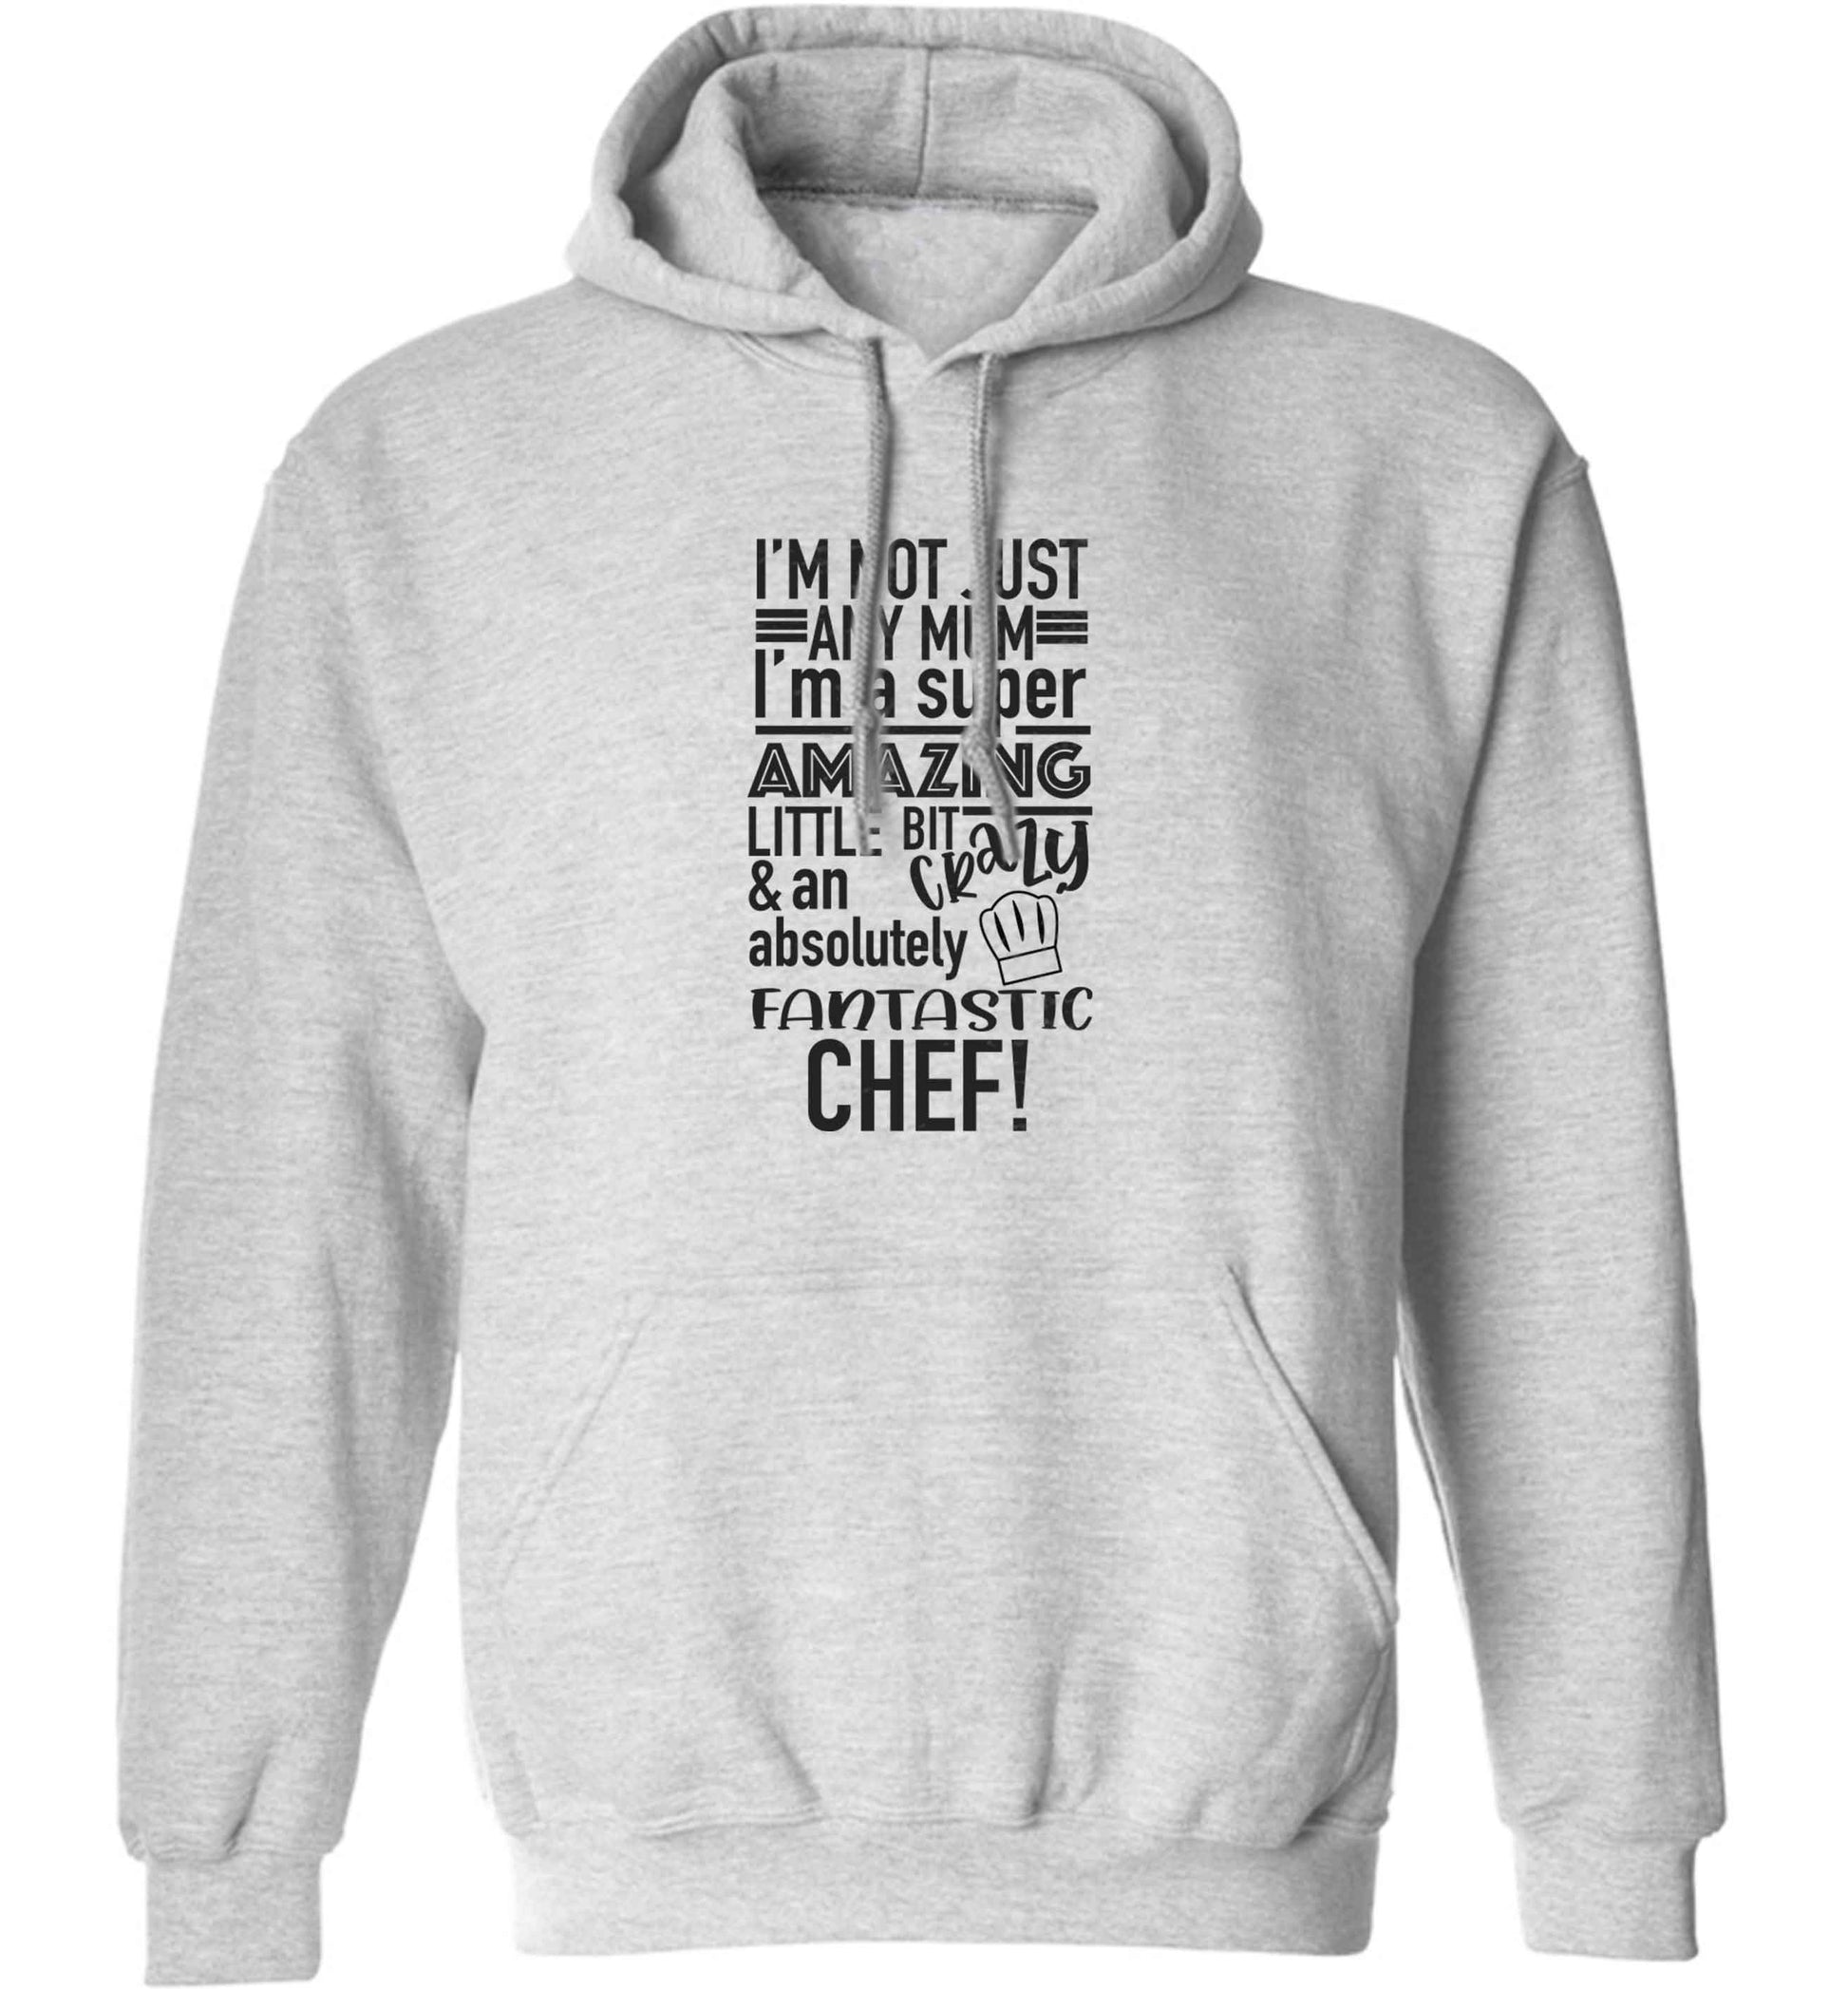 I'm not just any mum I'm a super amazing little bit crazy and an absolutely fantastic chef! adults unisex grey hoodie 2XL